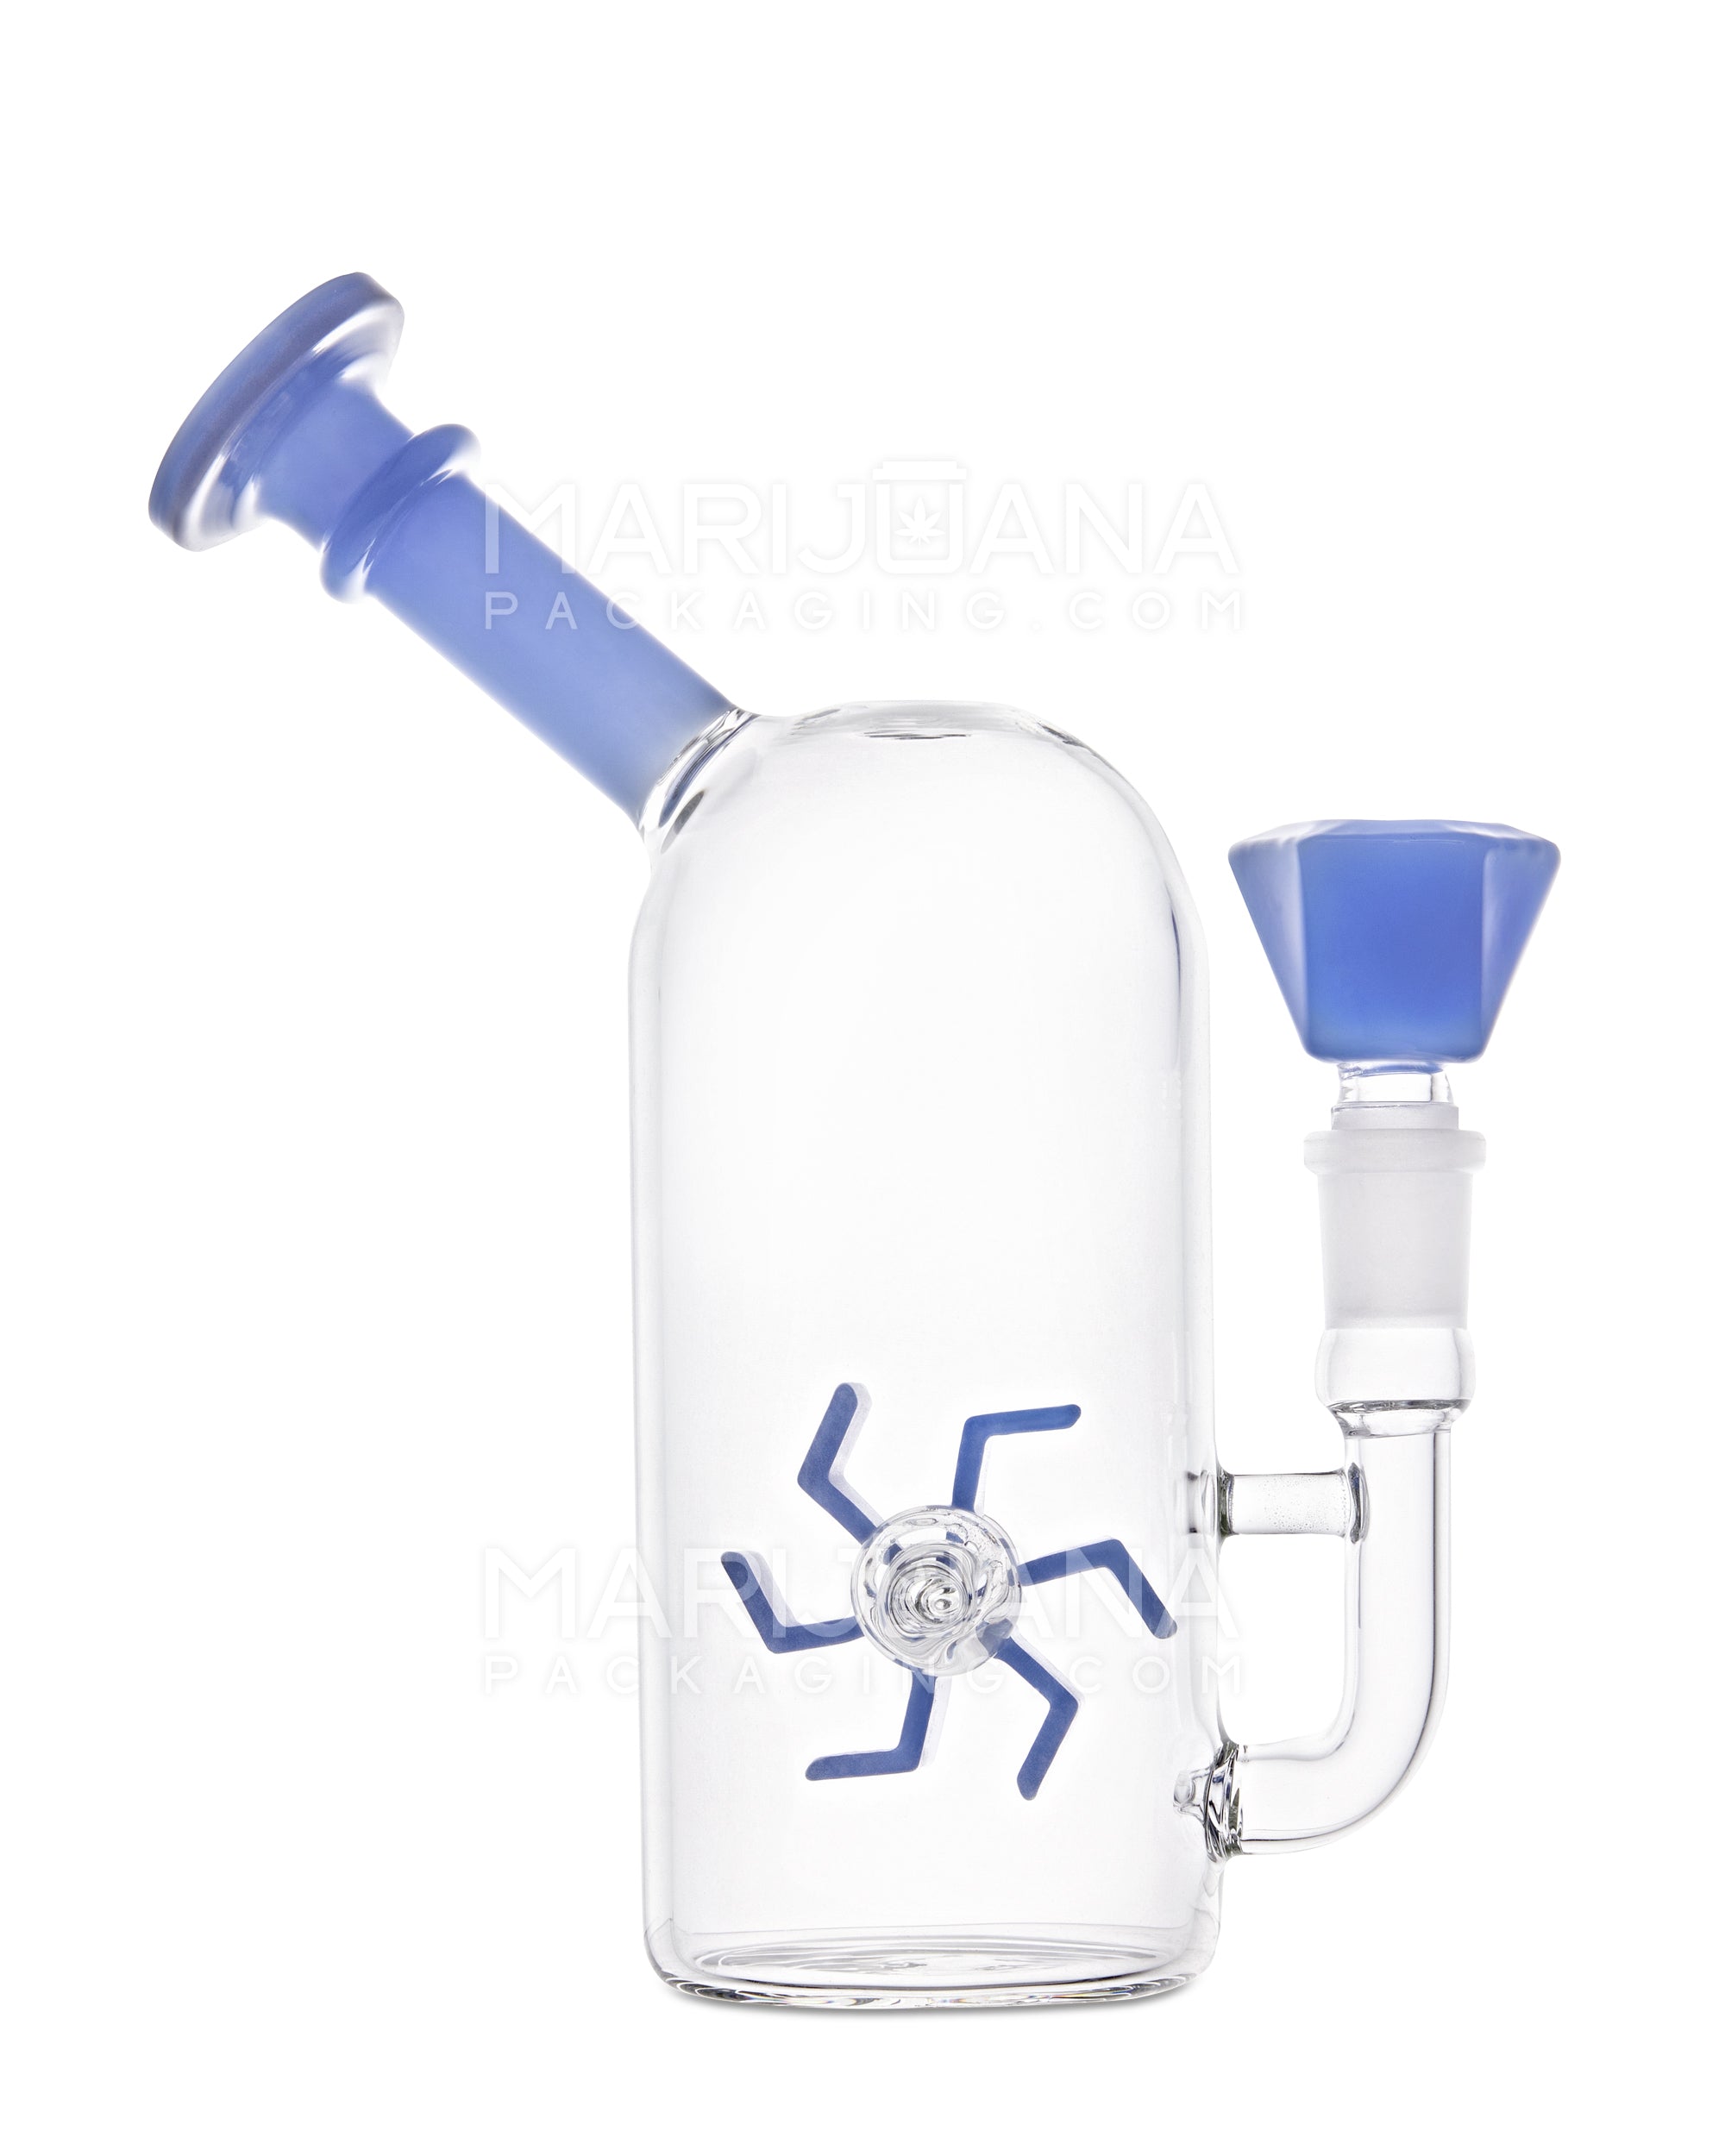 USA Glass | Bent Neck Windmill Perc Water Pipe | 7in Tall - 14mm Bowl - Blue